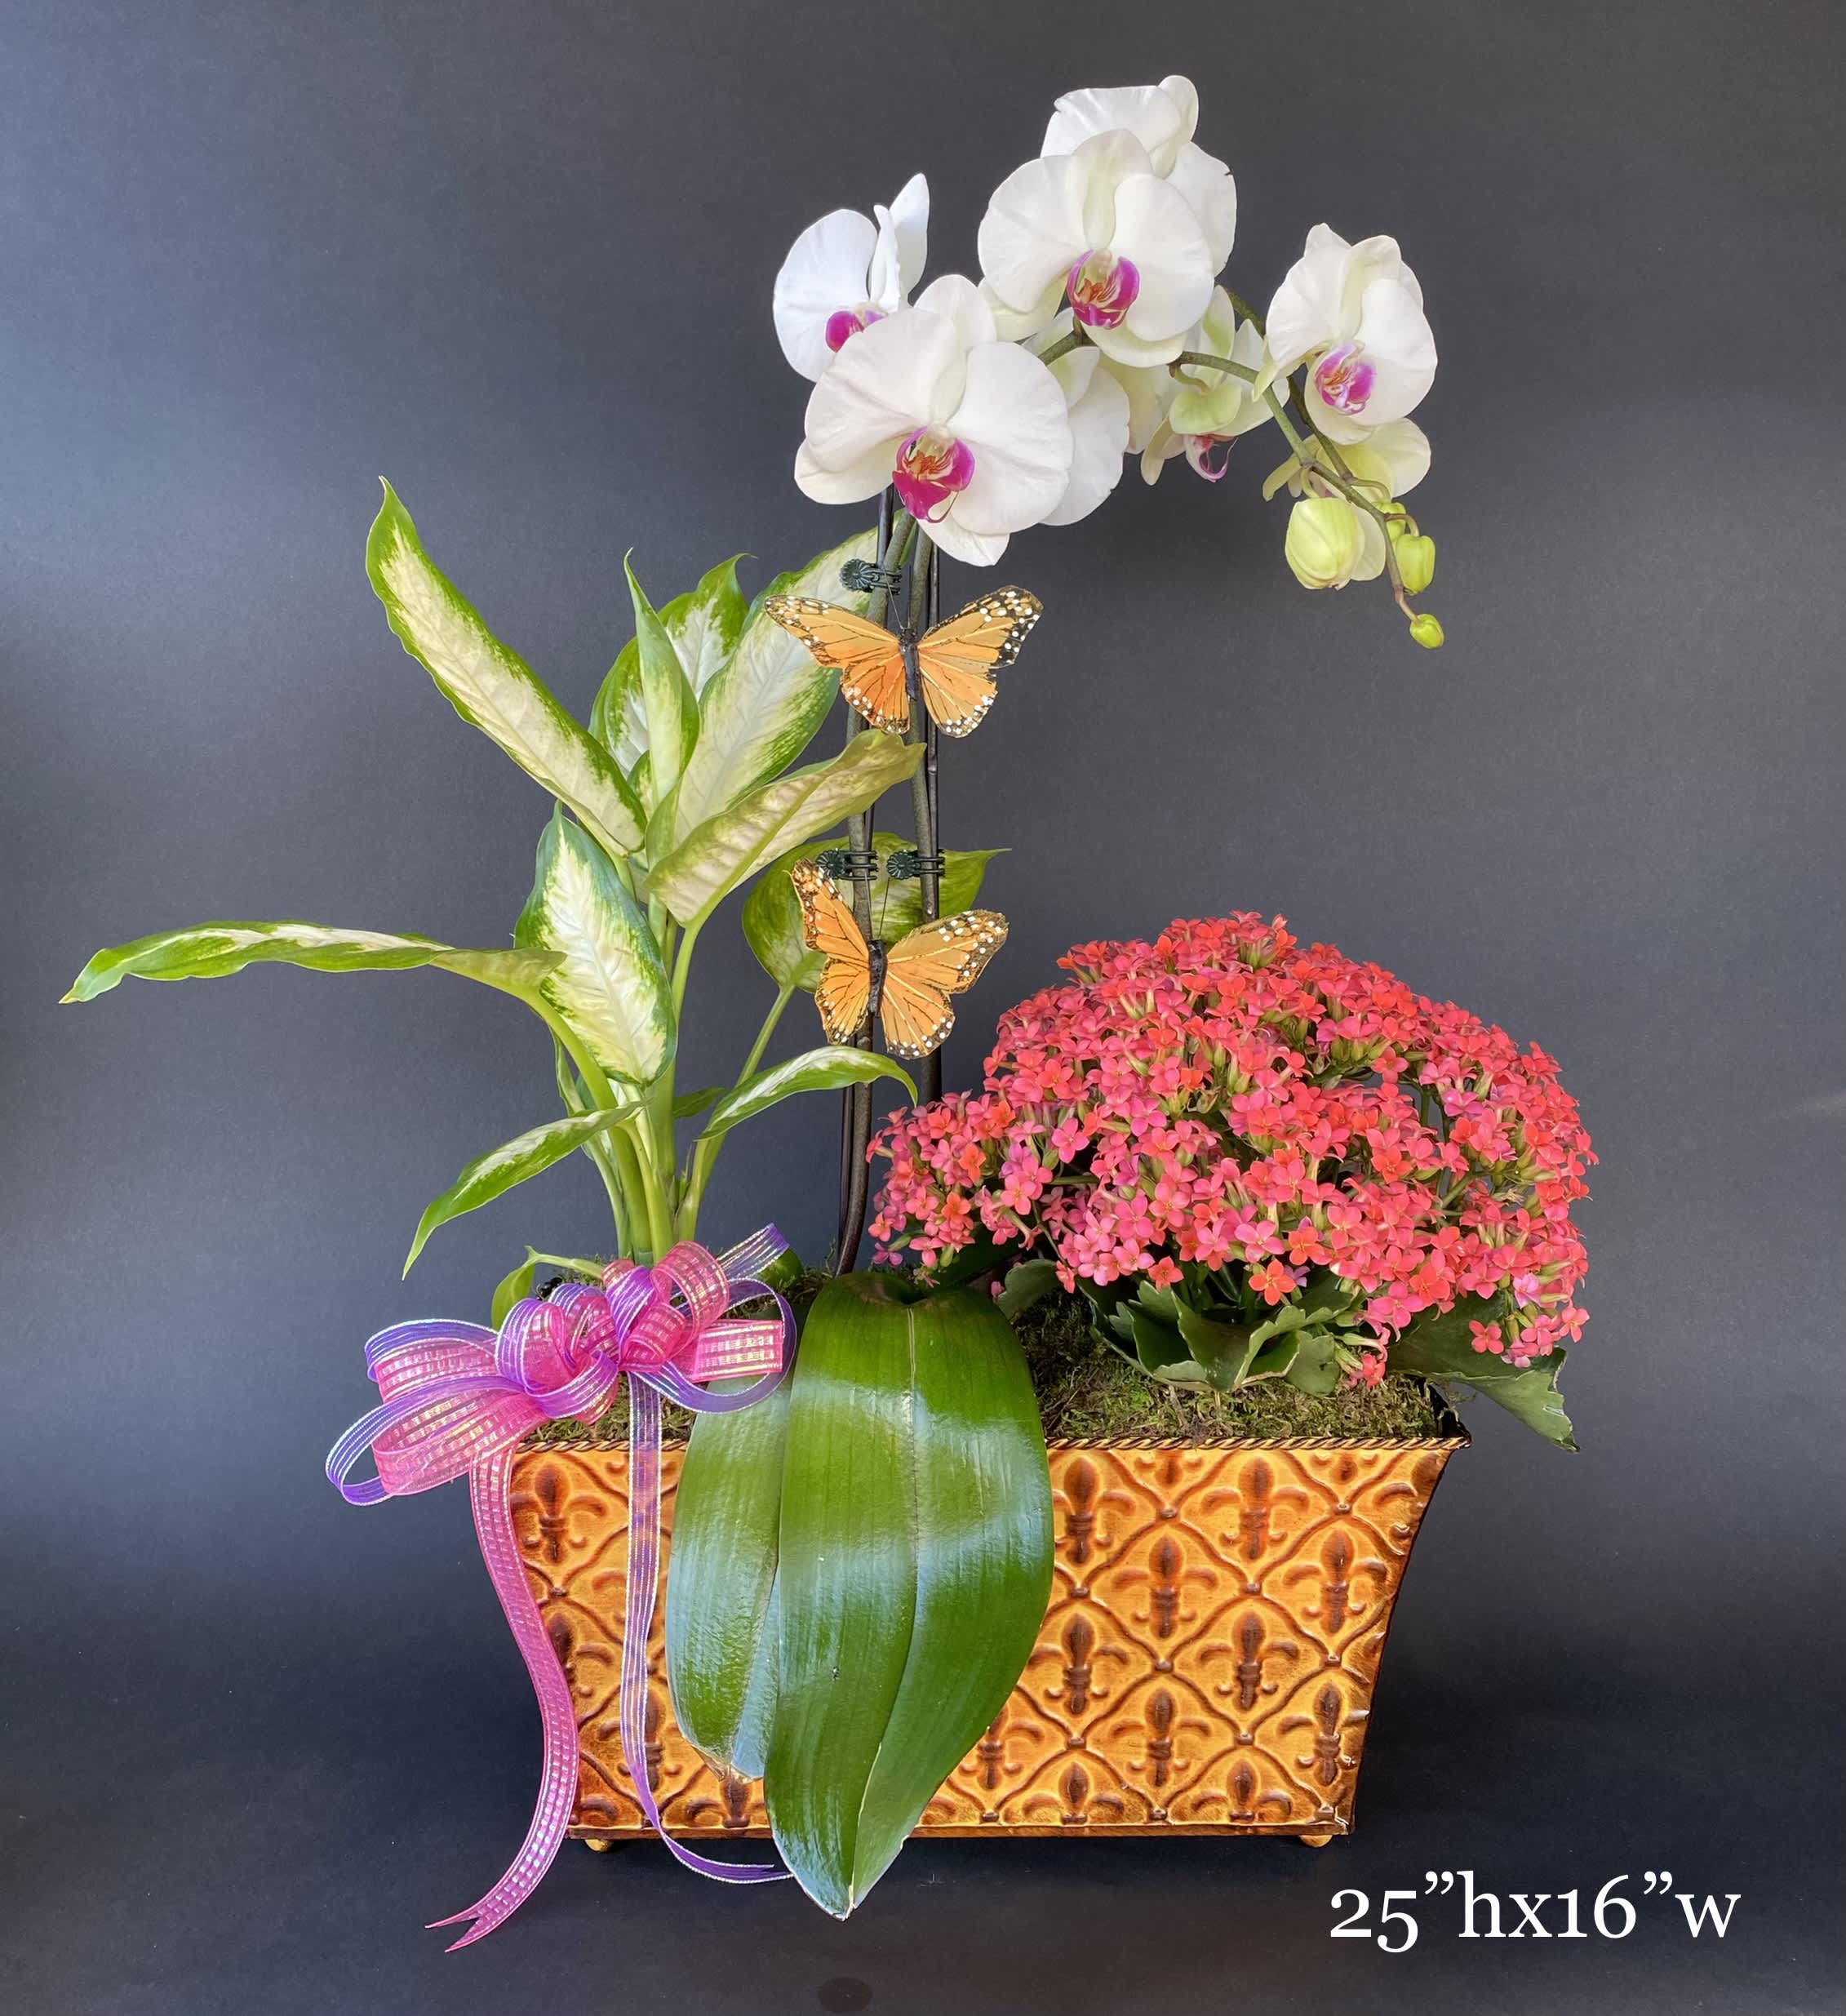 Precious Moments - &quot;Always enjoy the Precious Moments life has to offer&quot; Be aware that Orchids and Plant variations as well as their colors might be different due to availability.